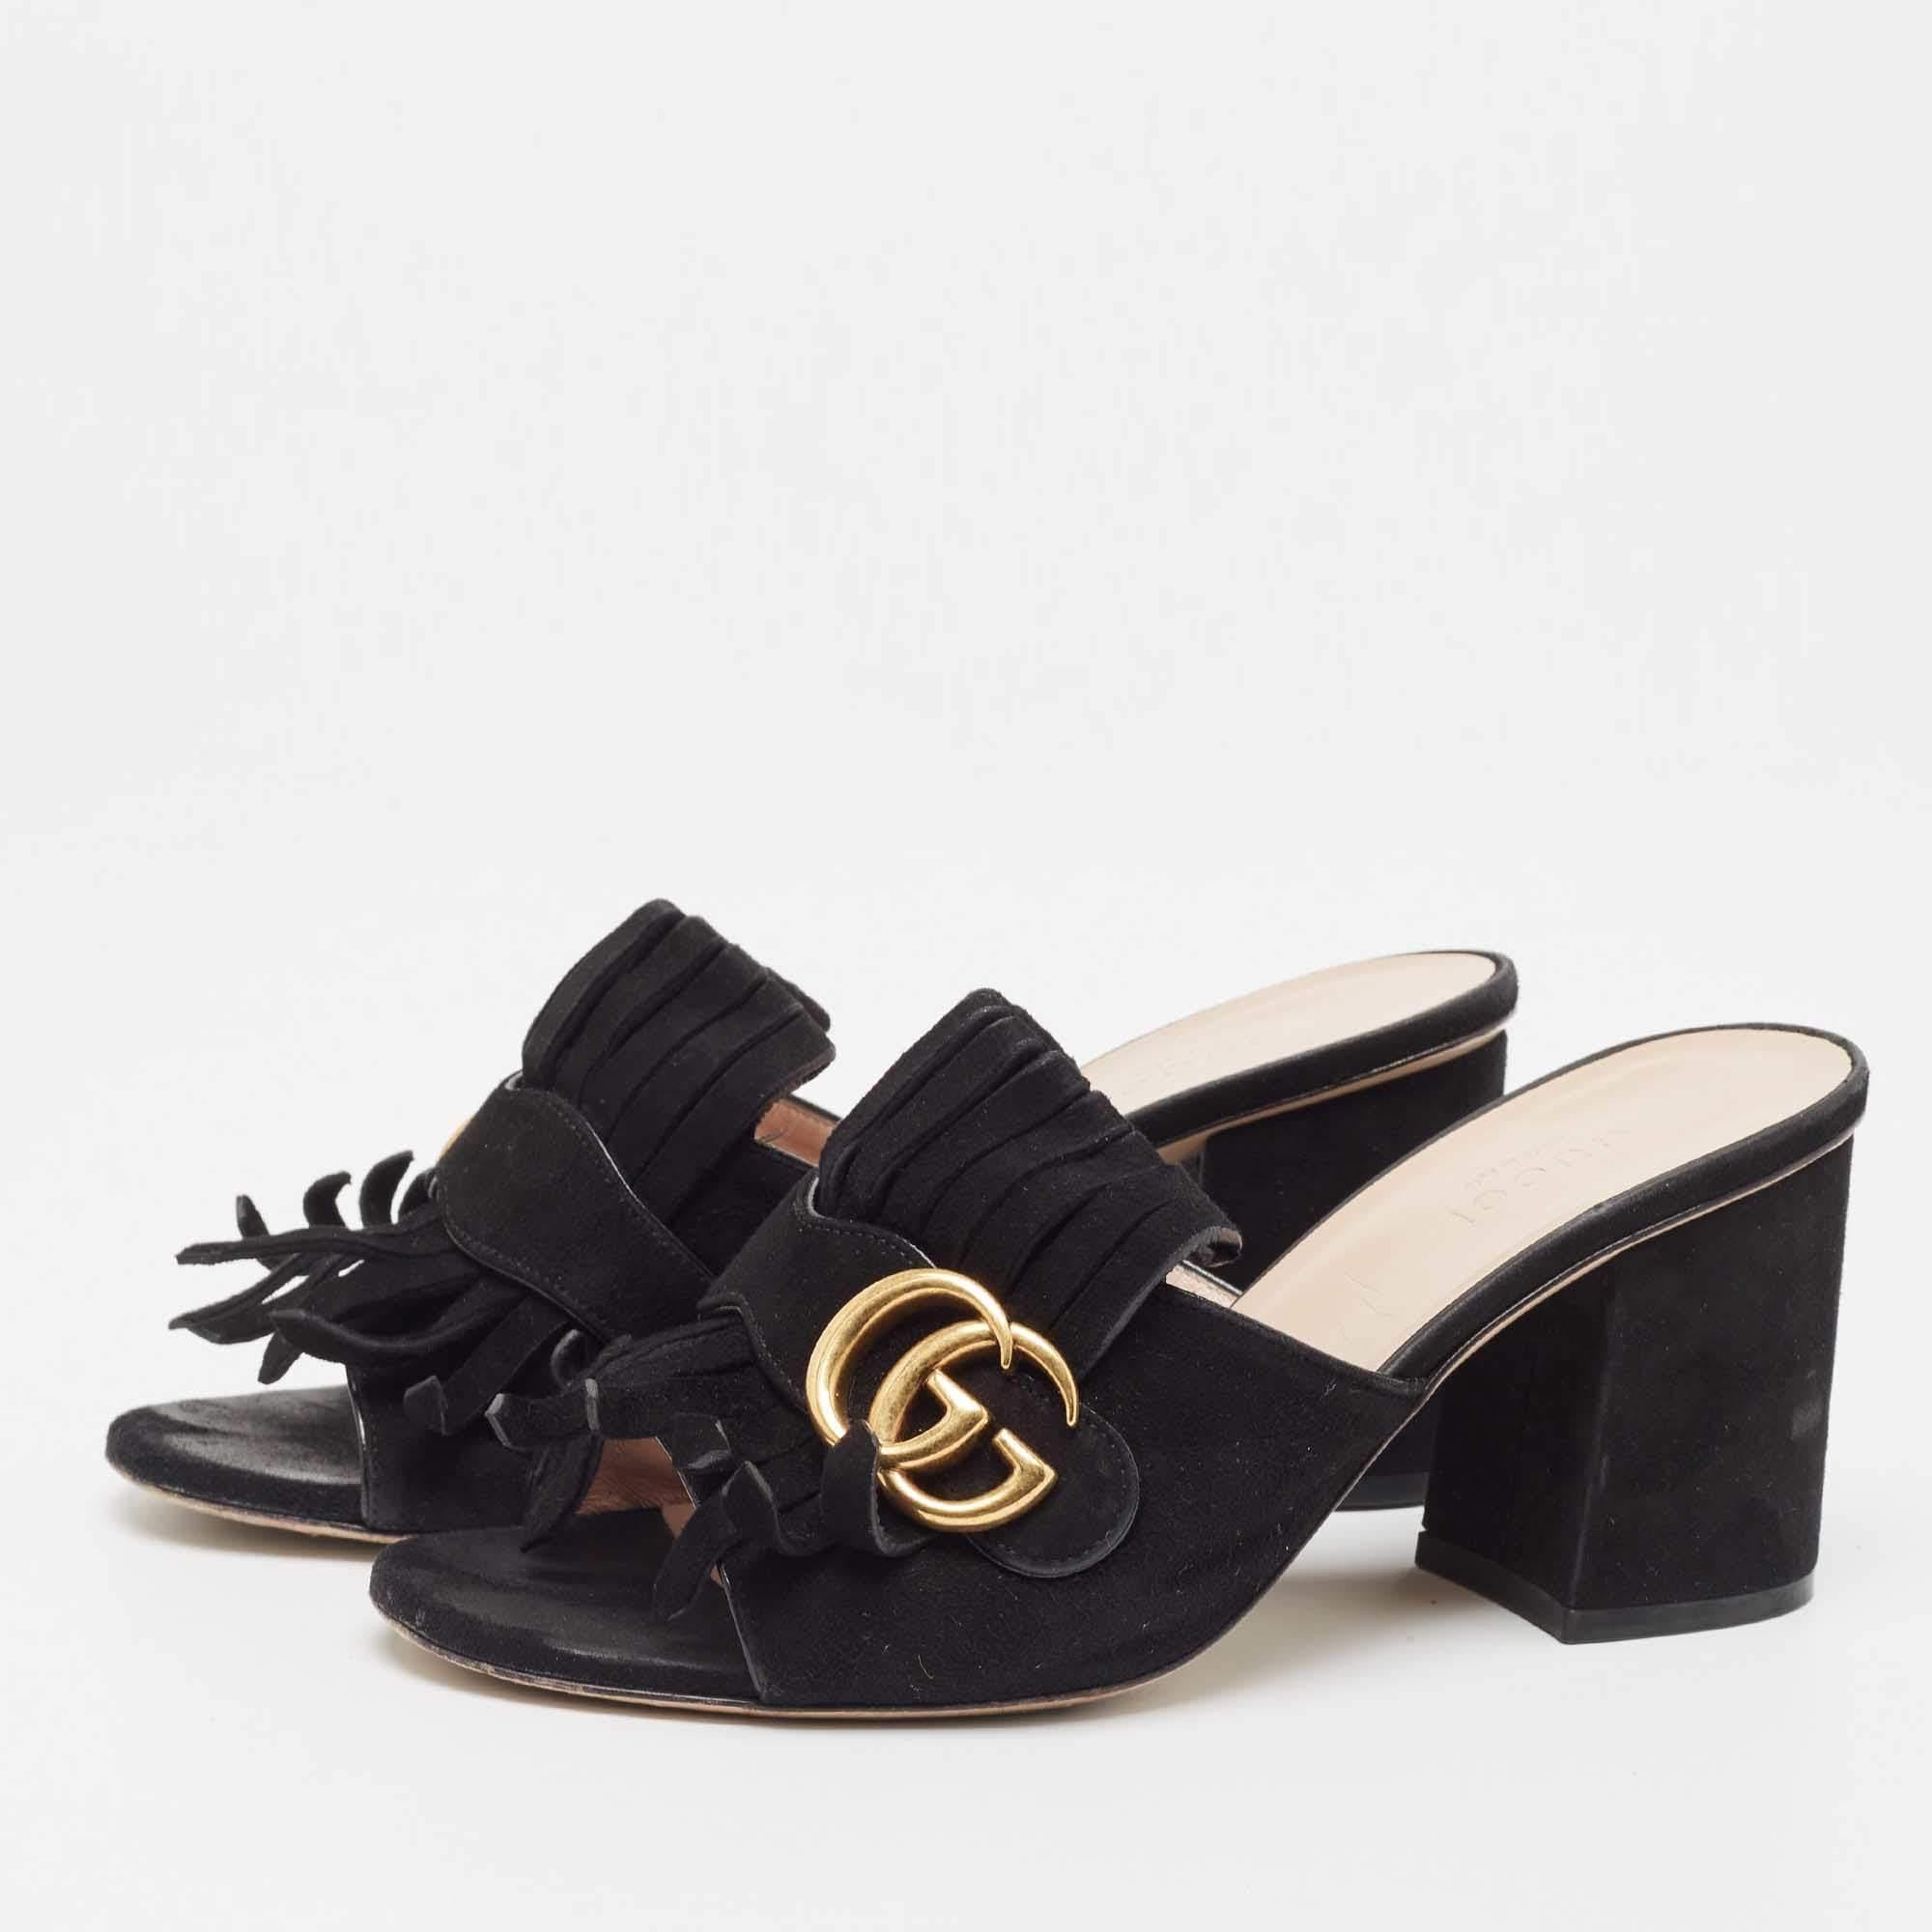 Gucci Black Suede GG Marmont Fringe Mules Size 37 For Sale 3